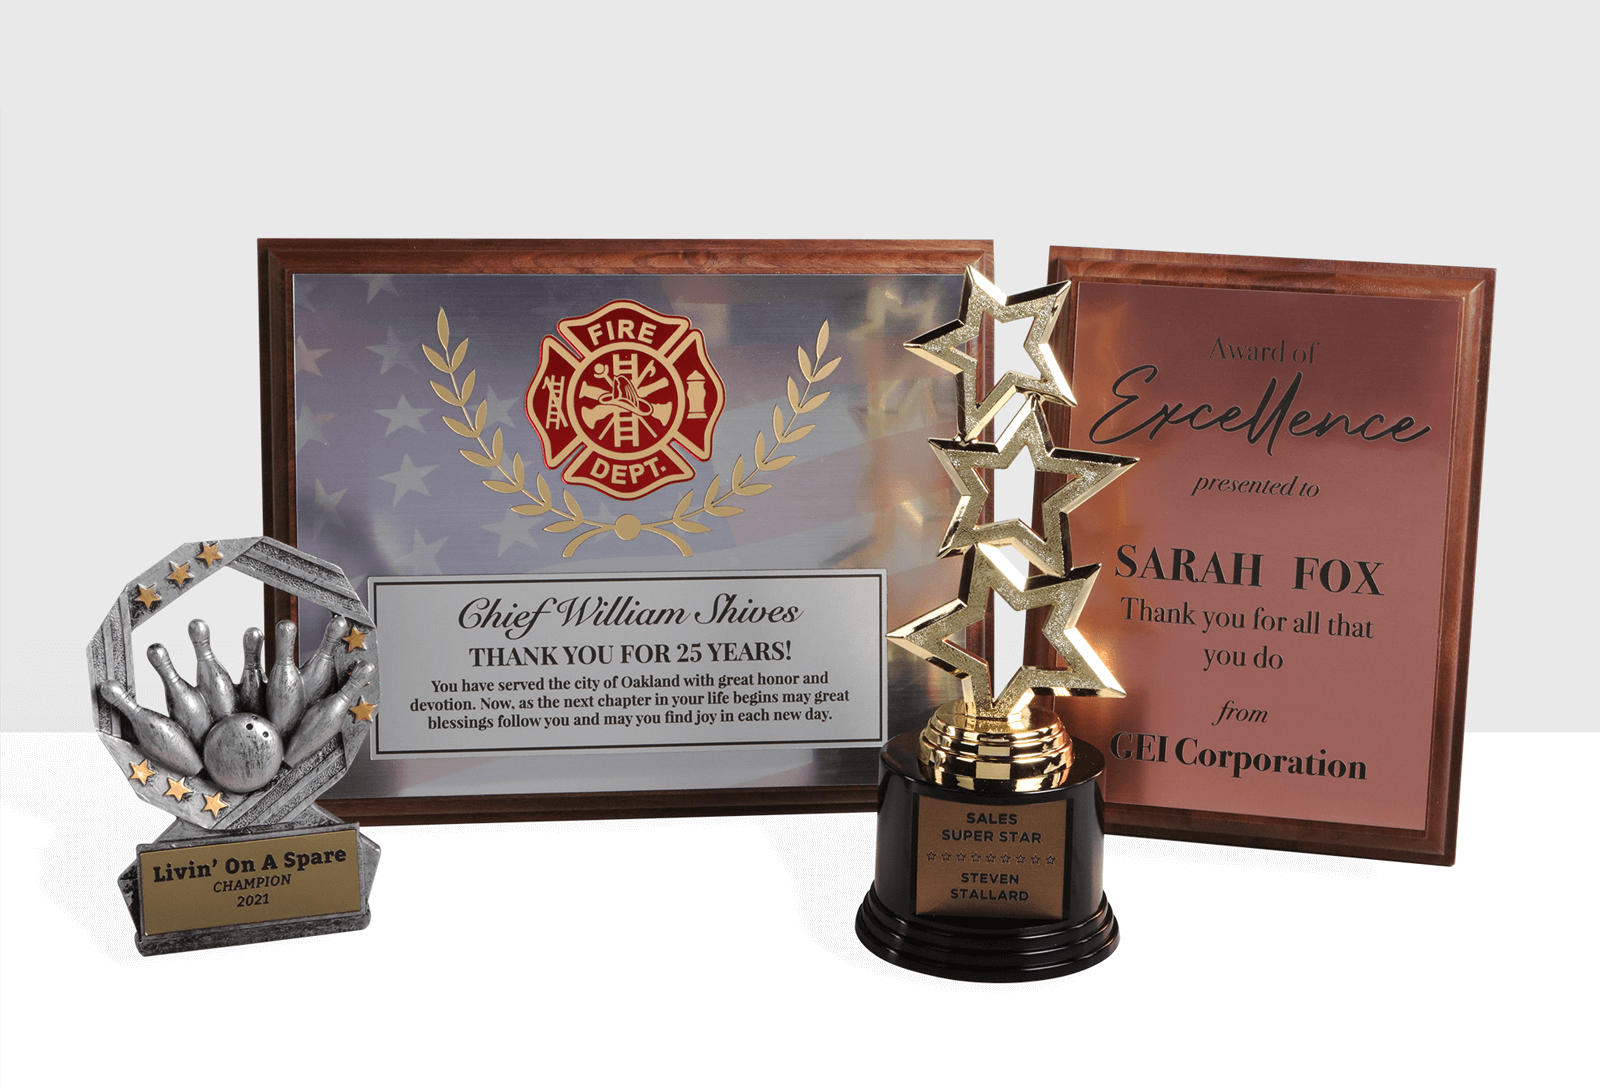 variety of awards created using the FlexiColor material